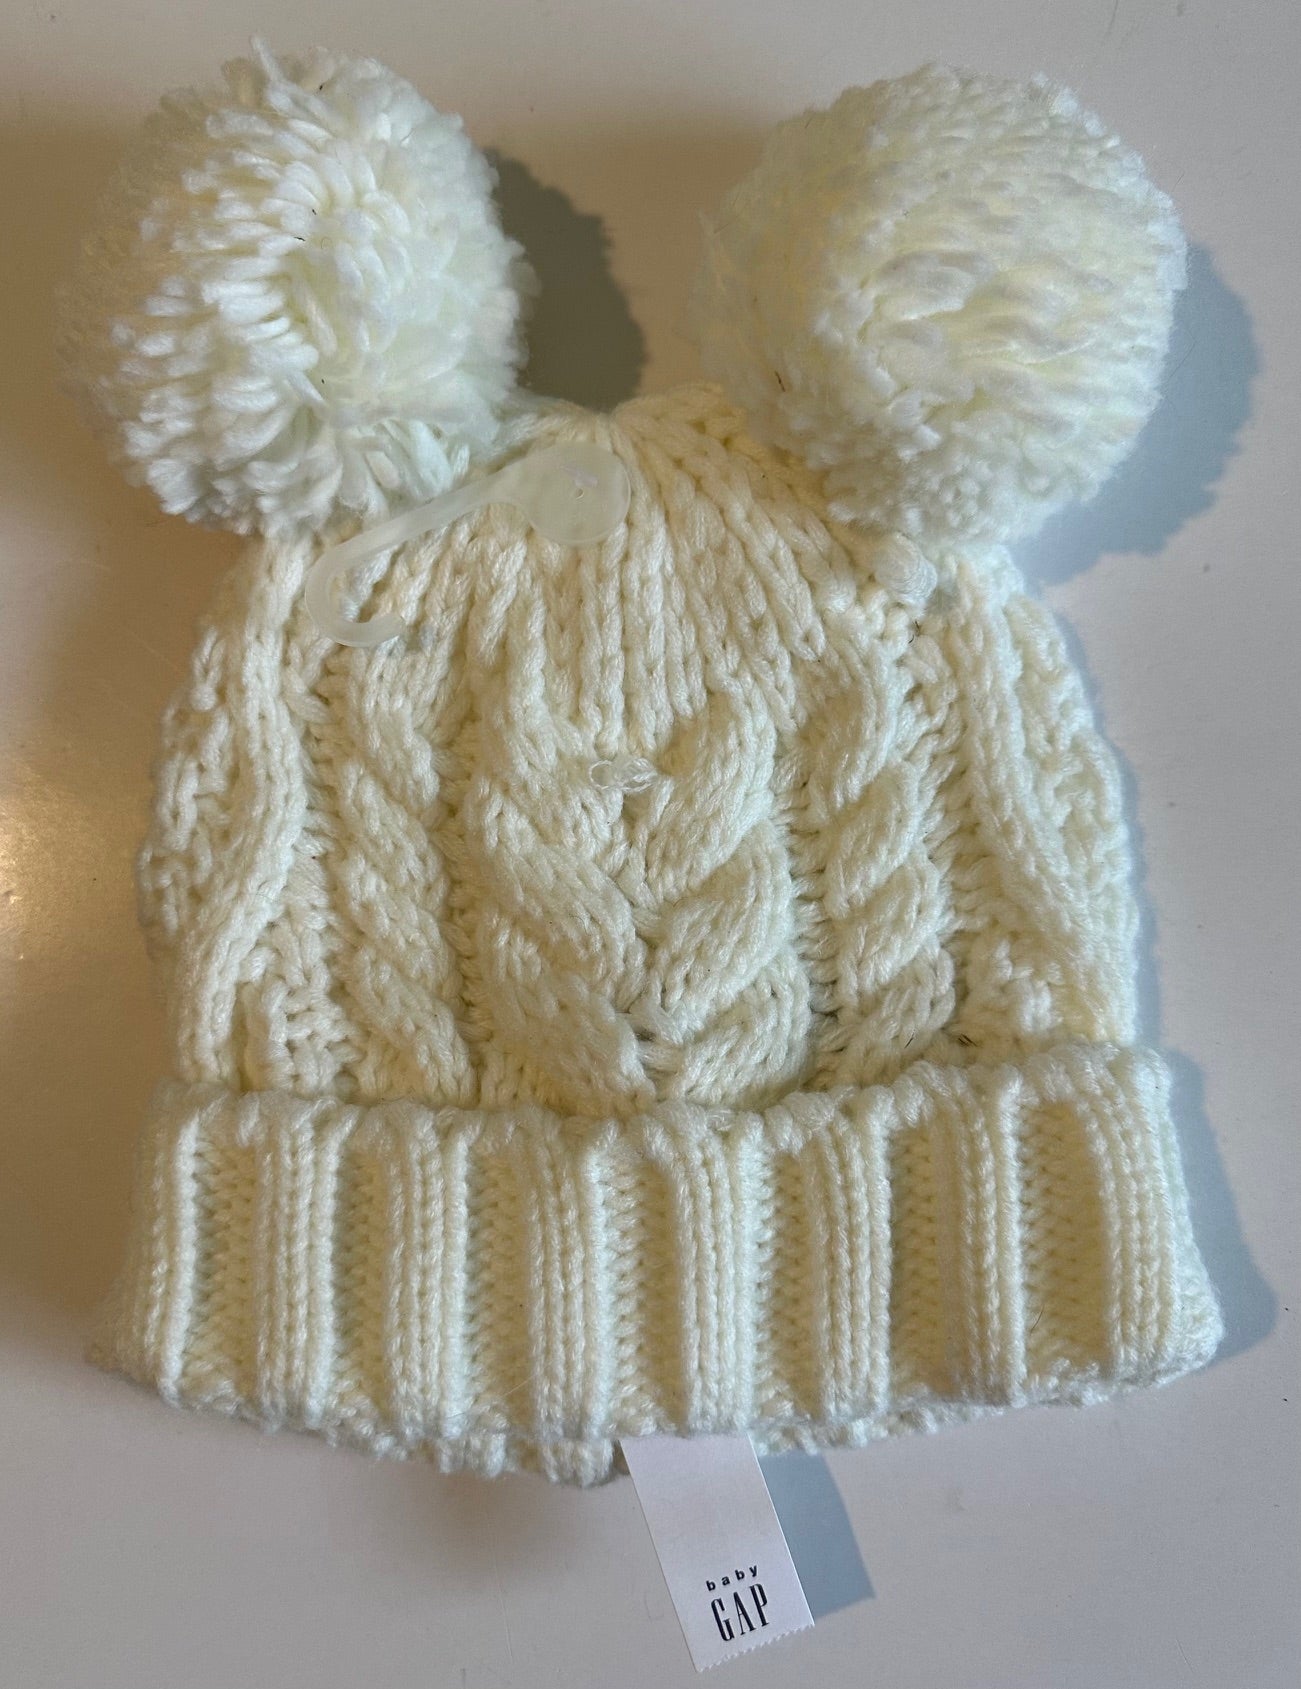 *New* Baby Gap, White Knit Toque with Two Pom-Poms - Size Small/Medium